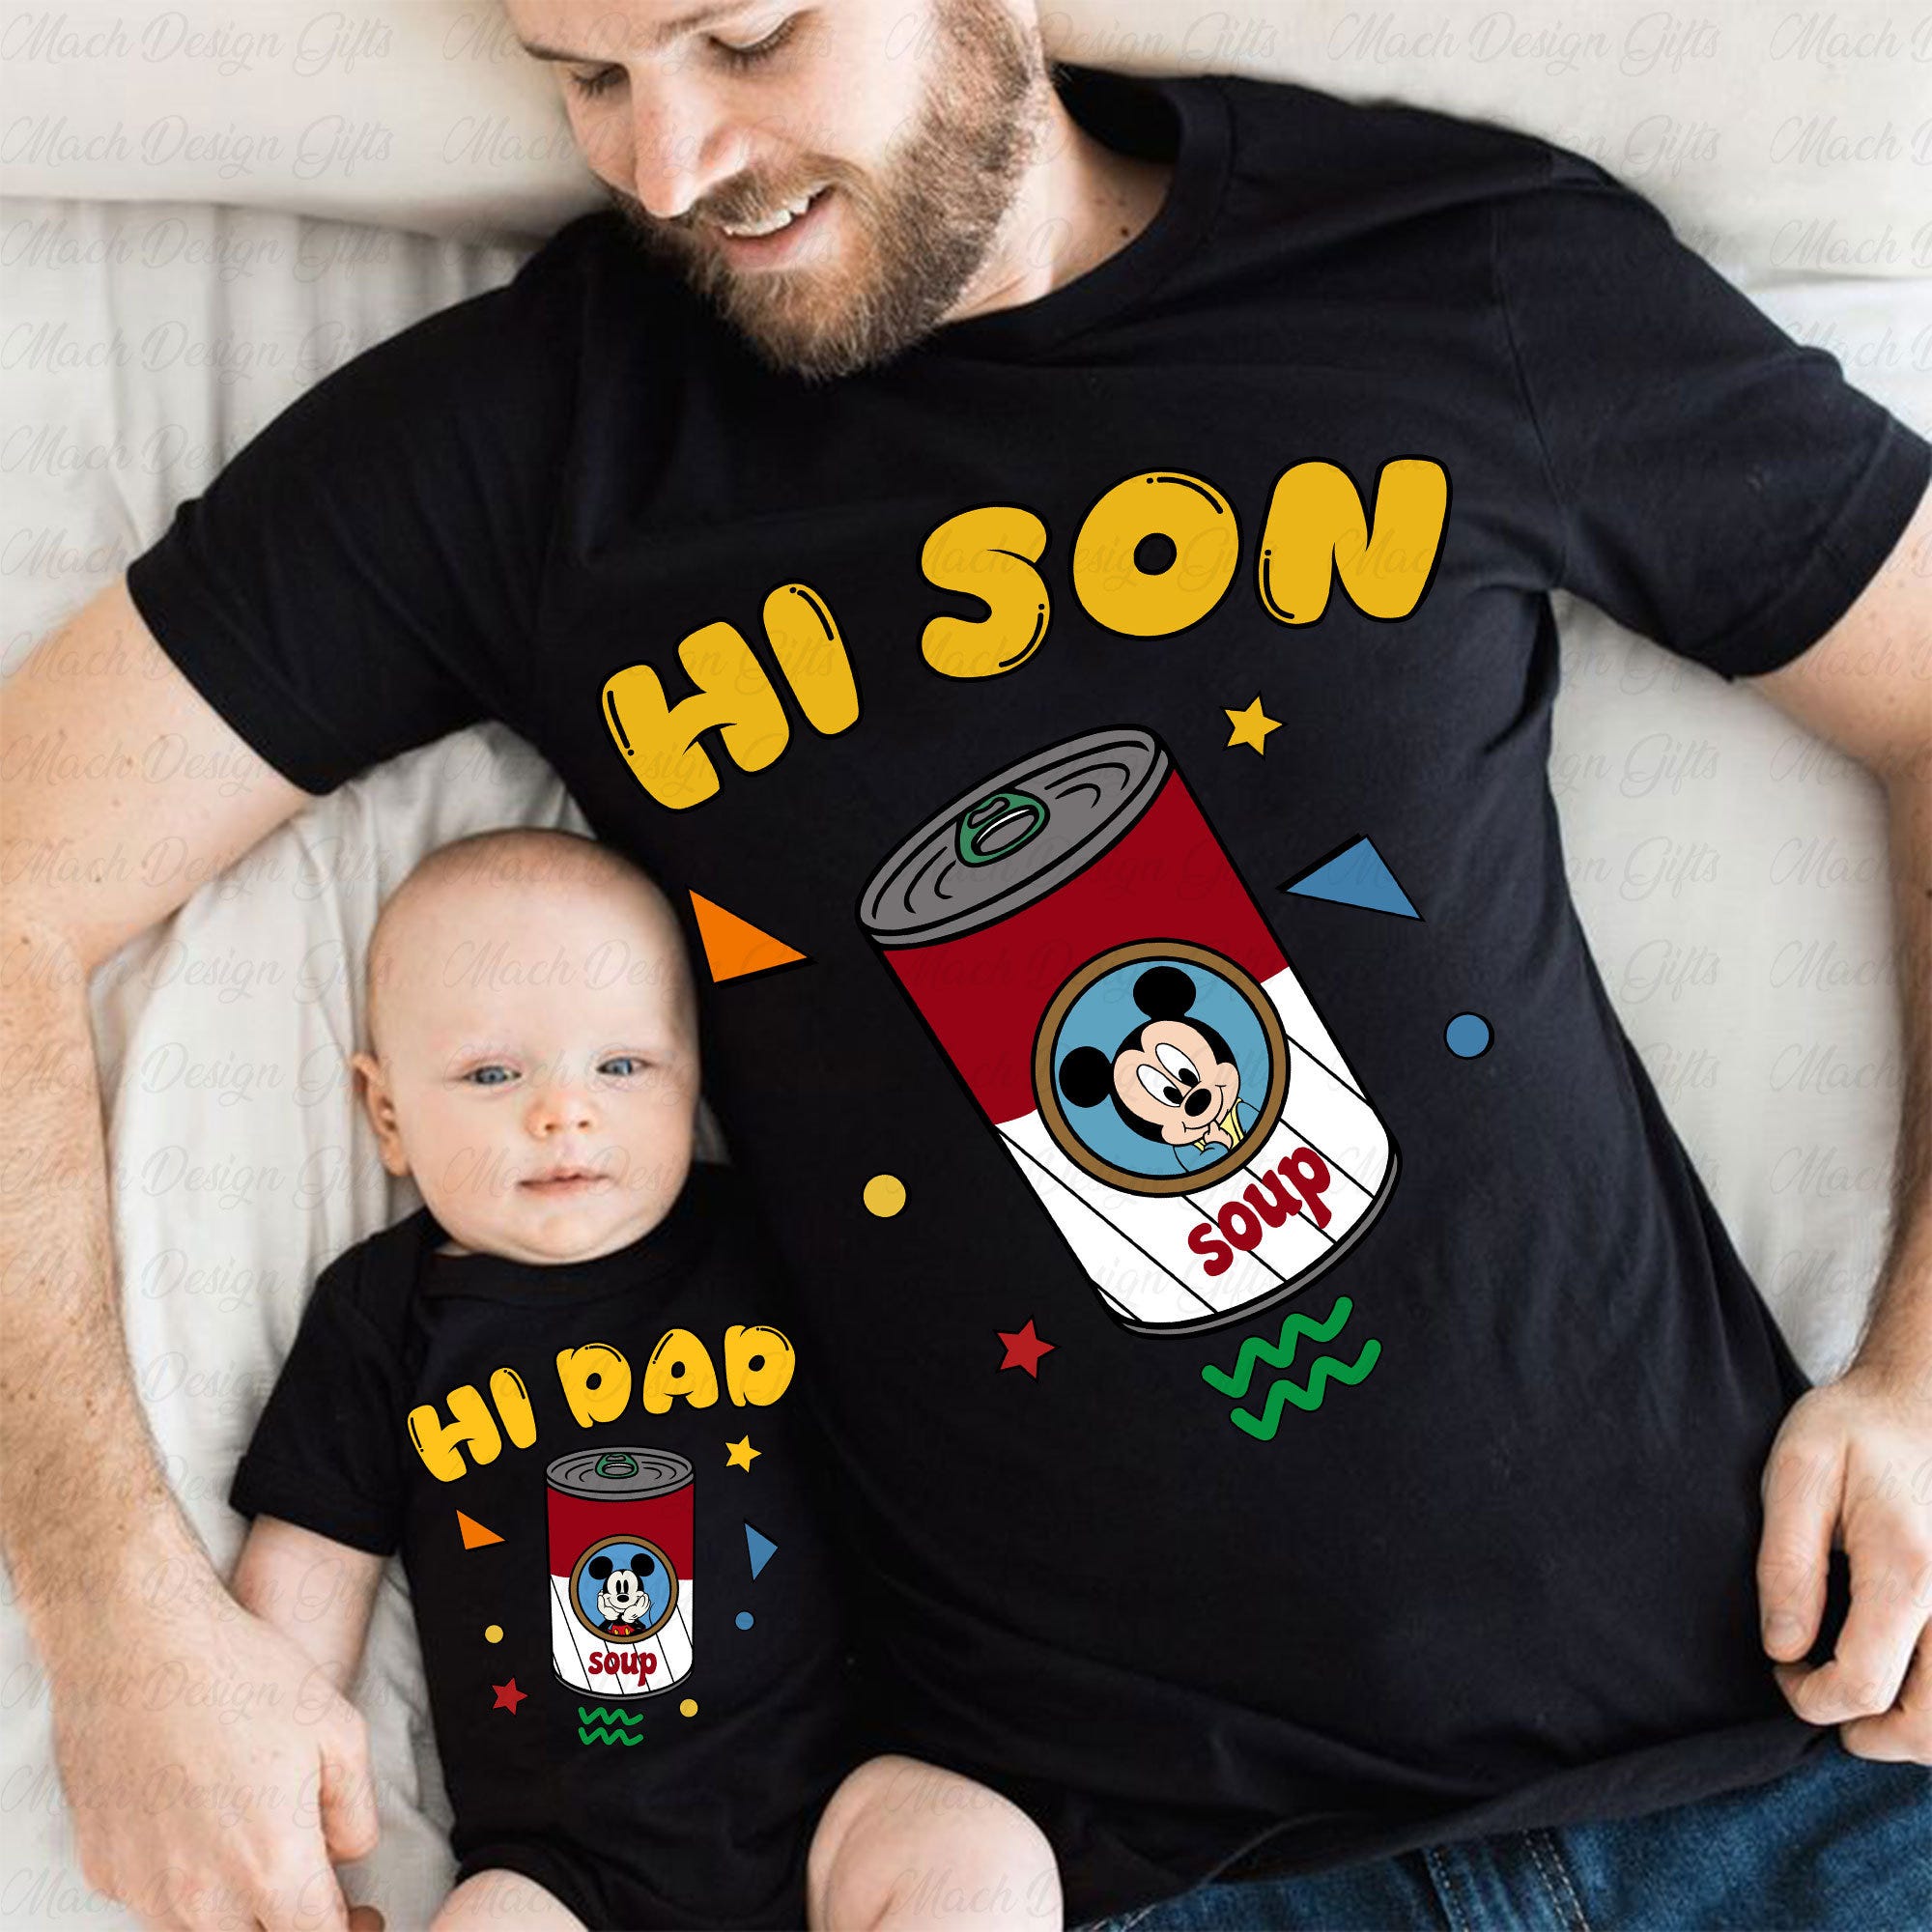 Matching Dad and Son Svg, Hi Dad Soup Svg, Father and Son Svg, Happy Fathers Day Svg, Mouse Dad Shirt, Mouse and Friends, Matching Family